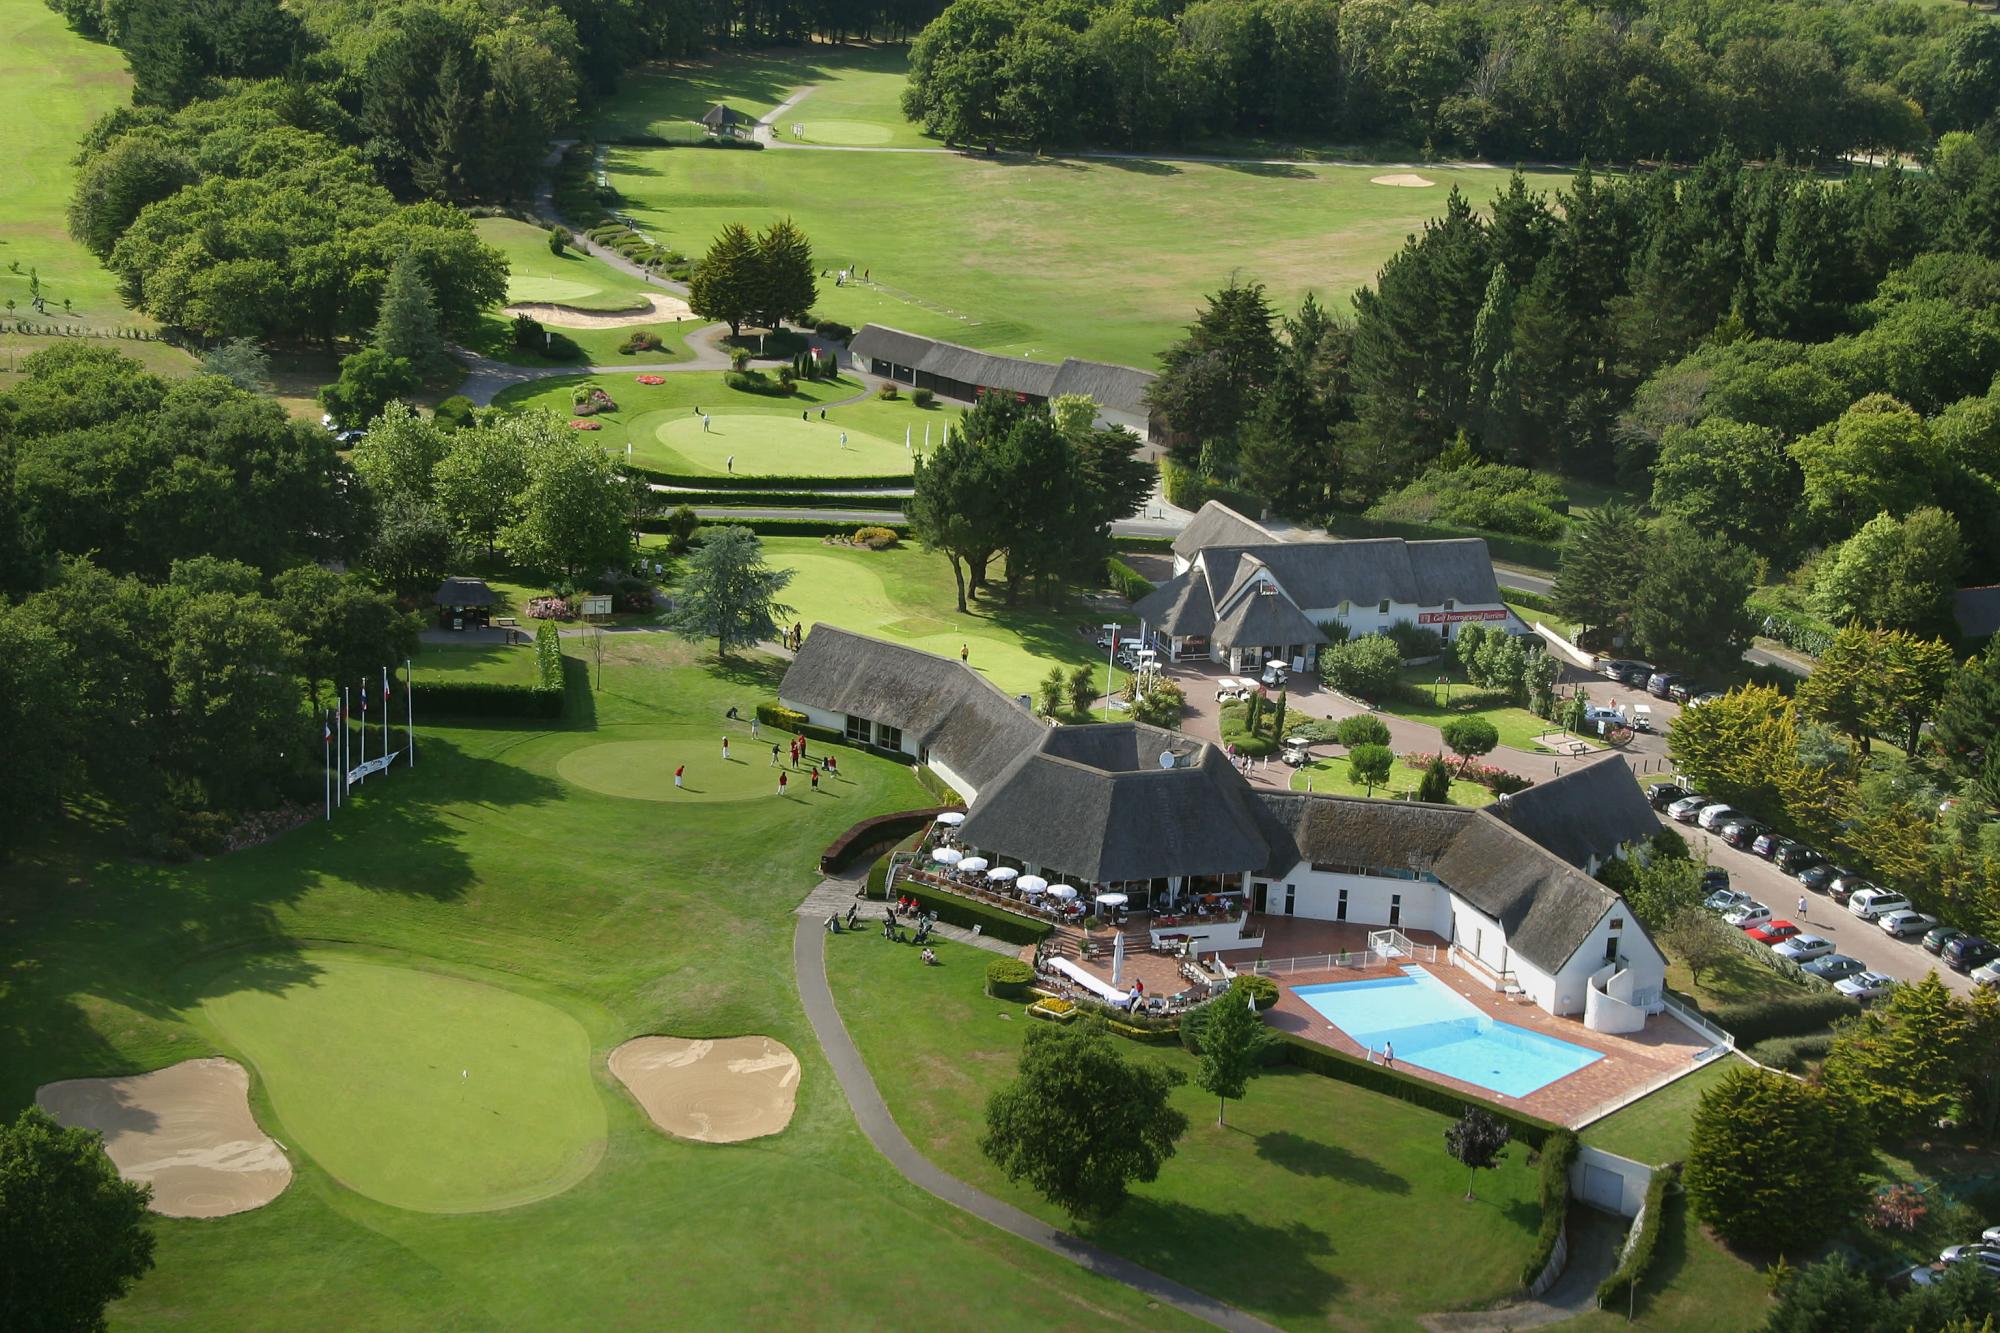 The Golf International Barriere La Baule's picturesque golf course within stunning South of France.